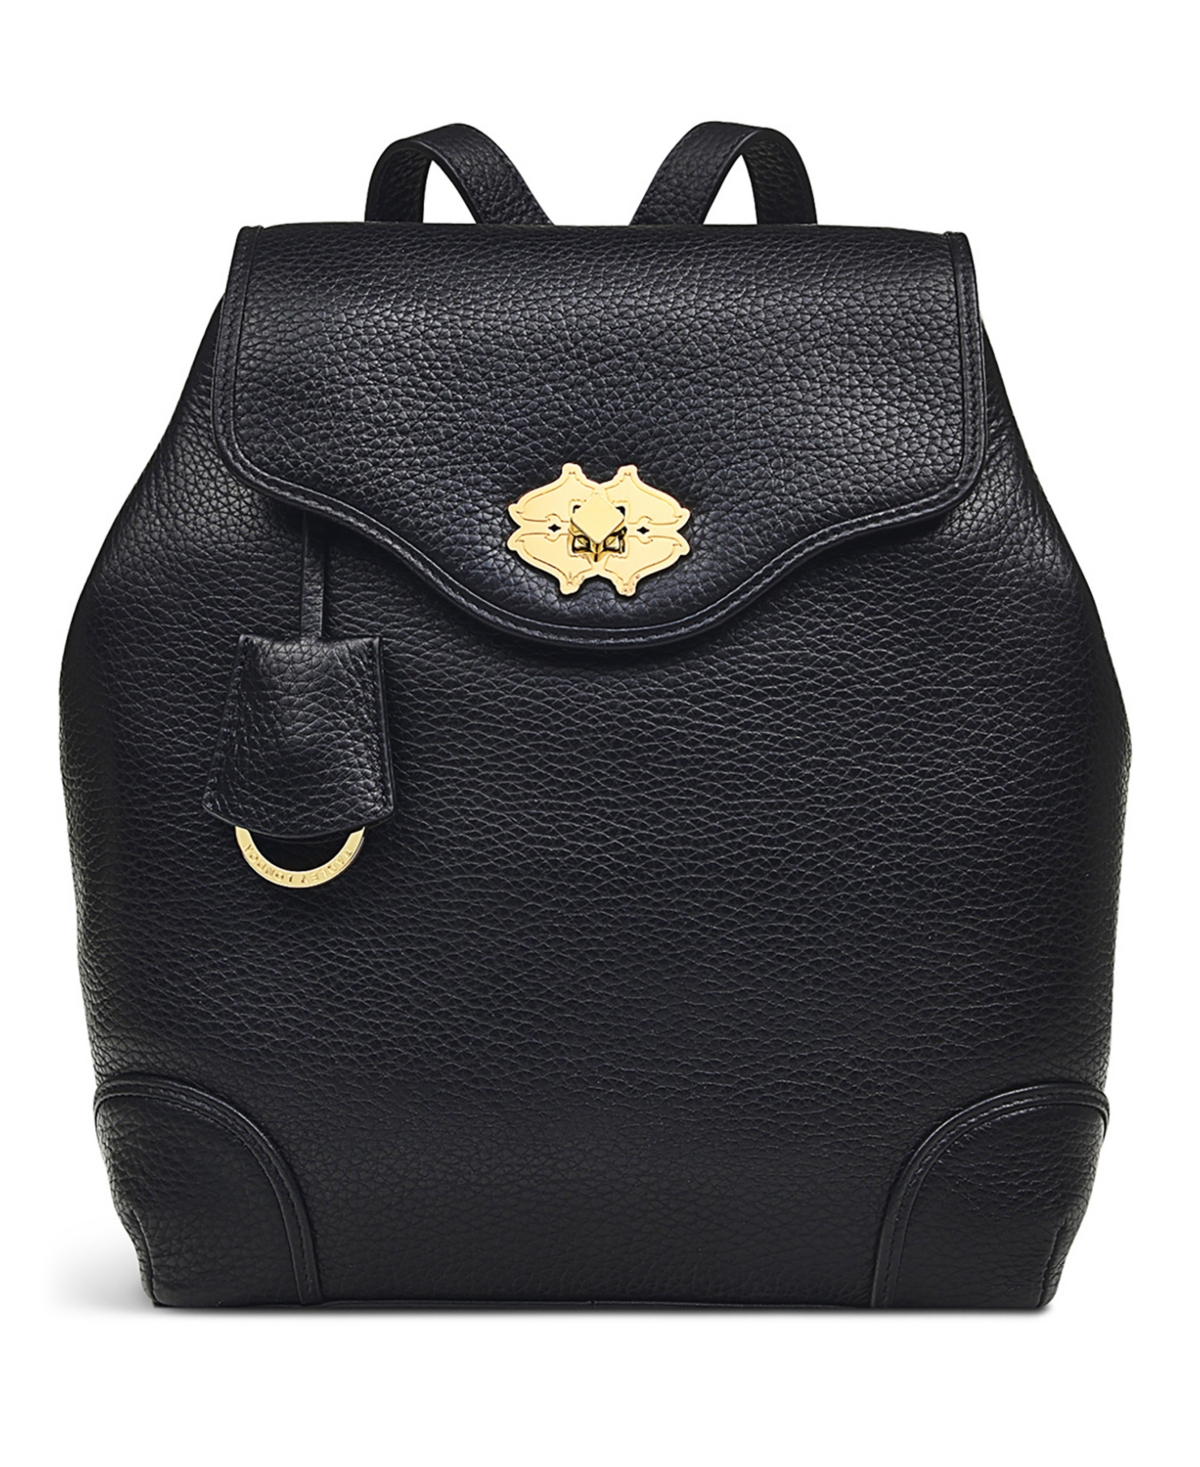 Radley London Heirloom Place Leather Small Flapover Backpack In Black